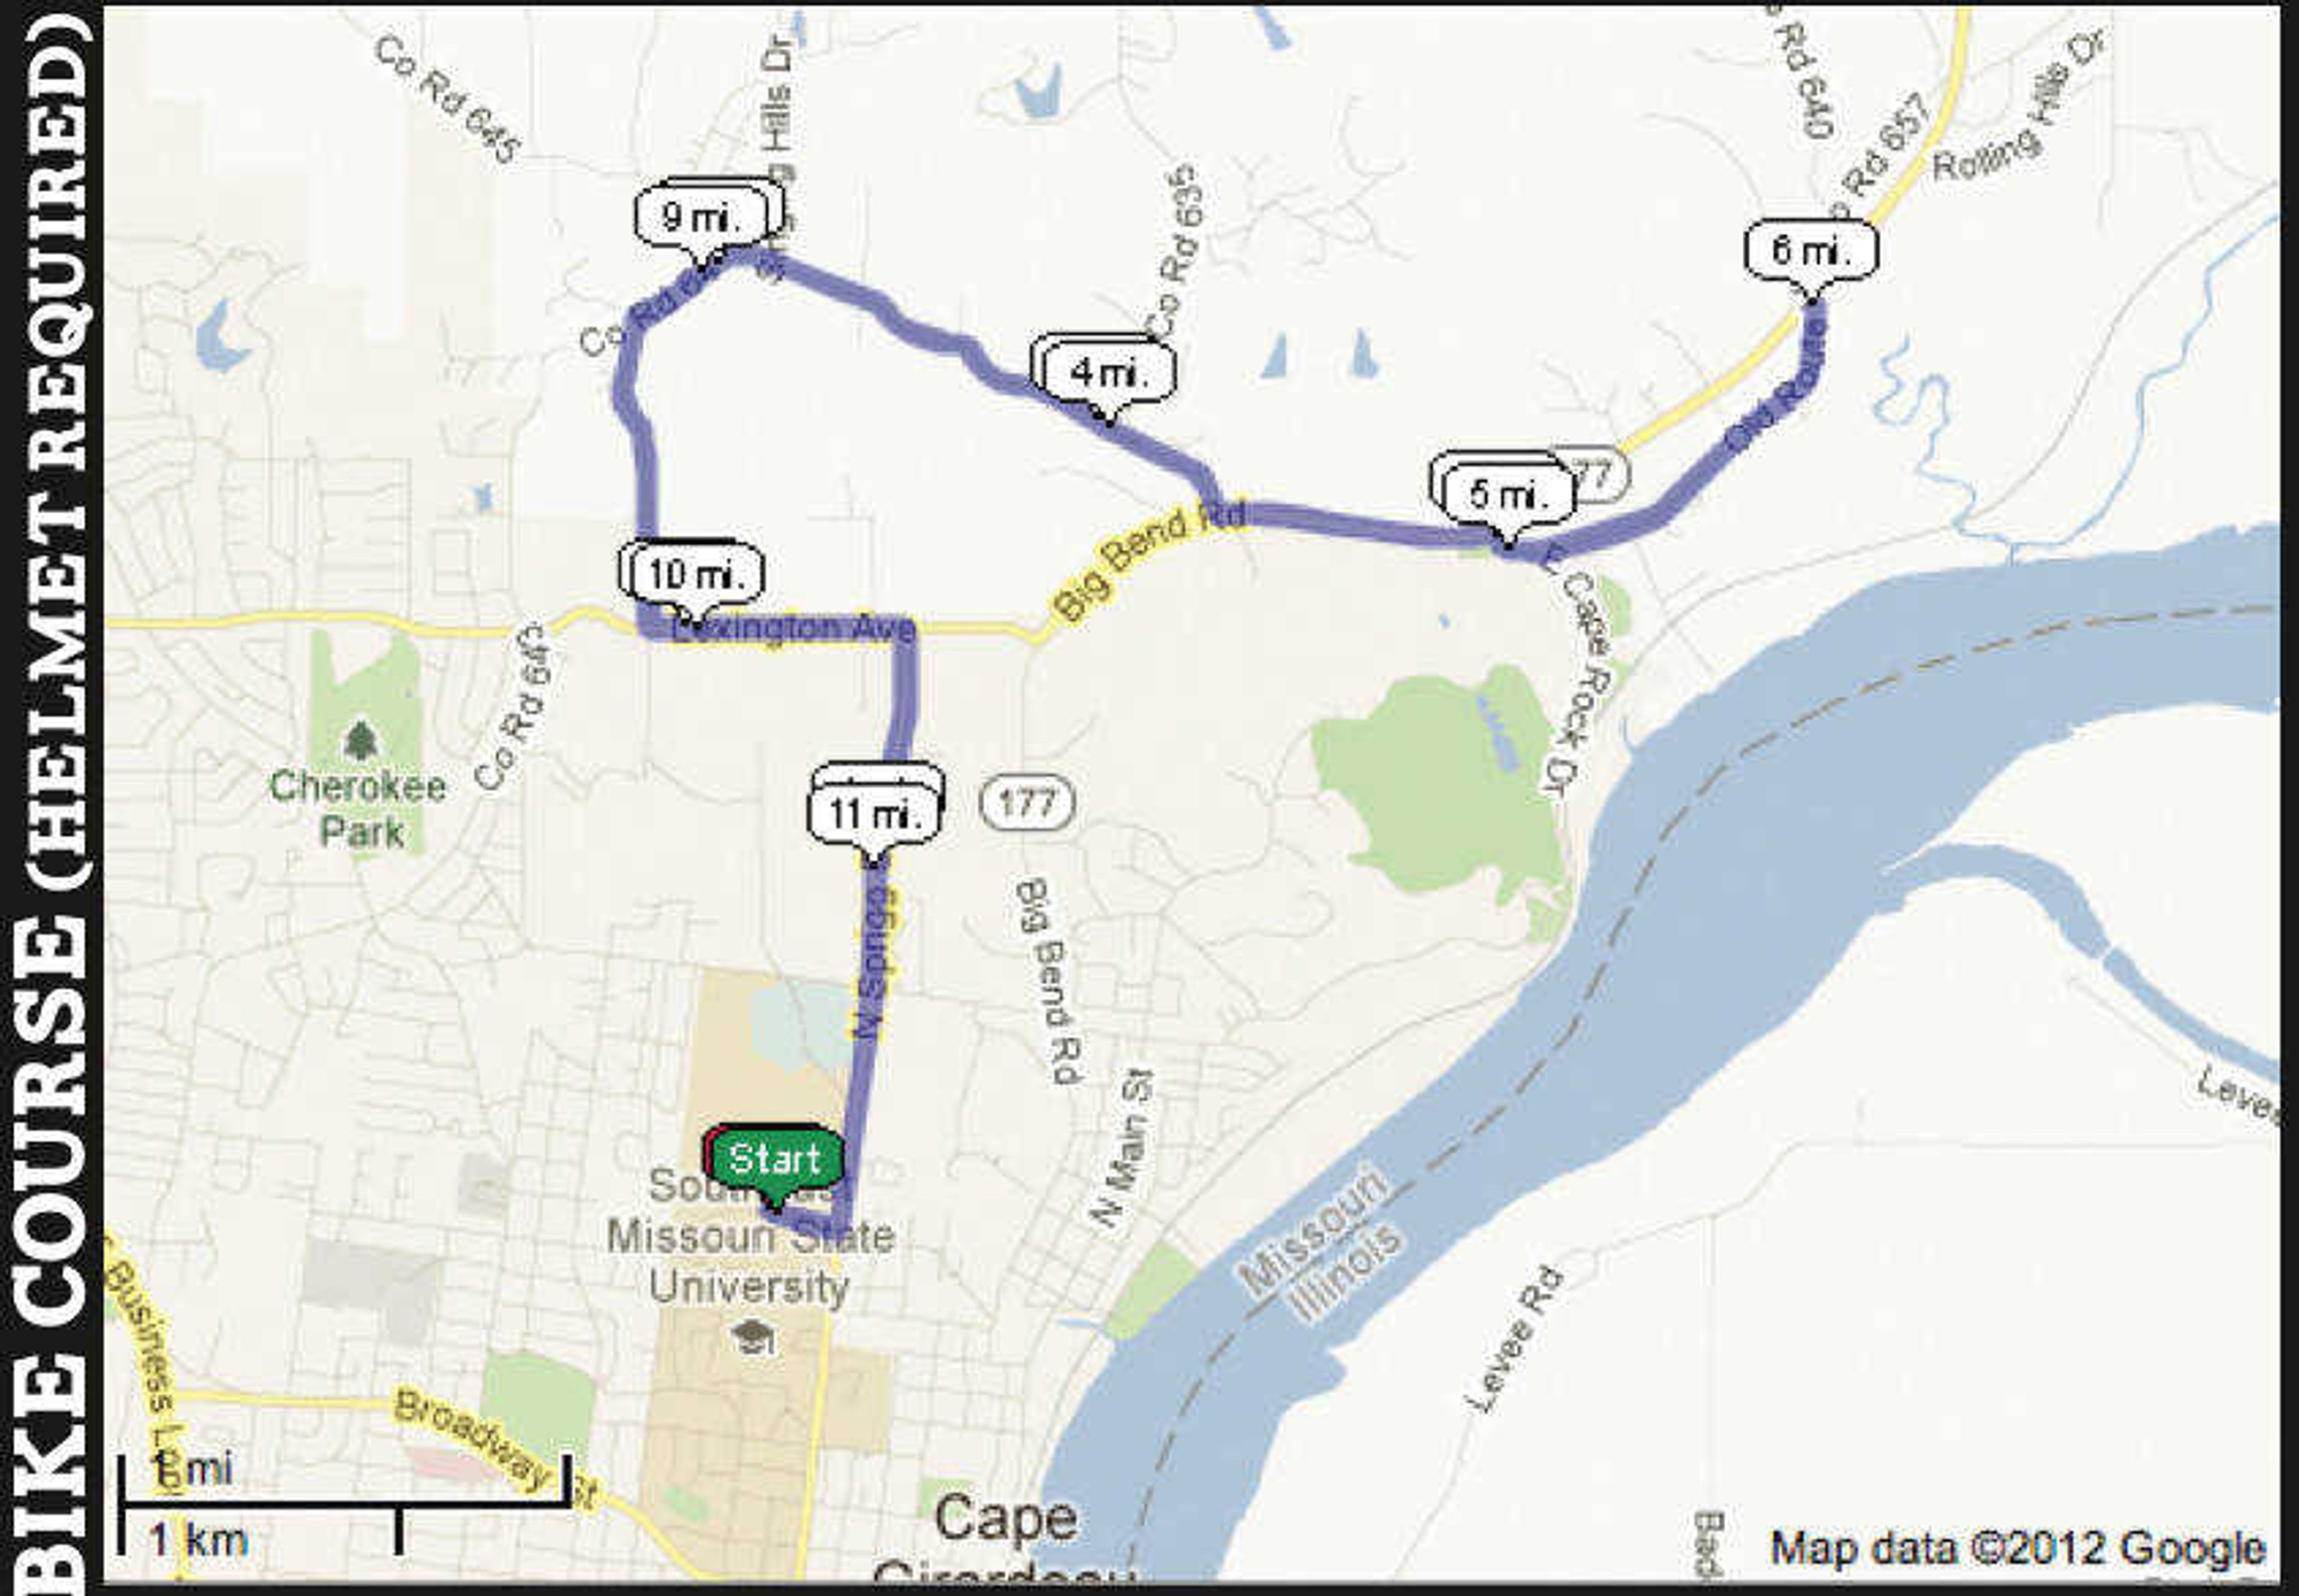 This is the bike route for the race.